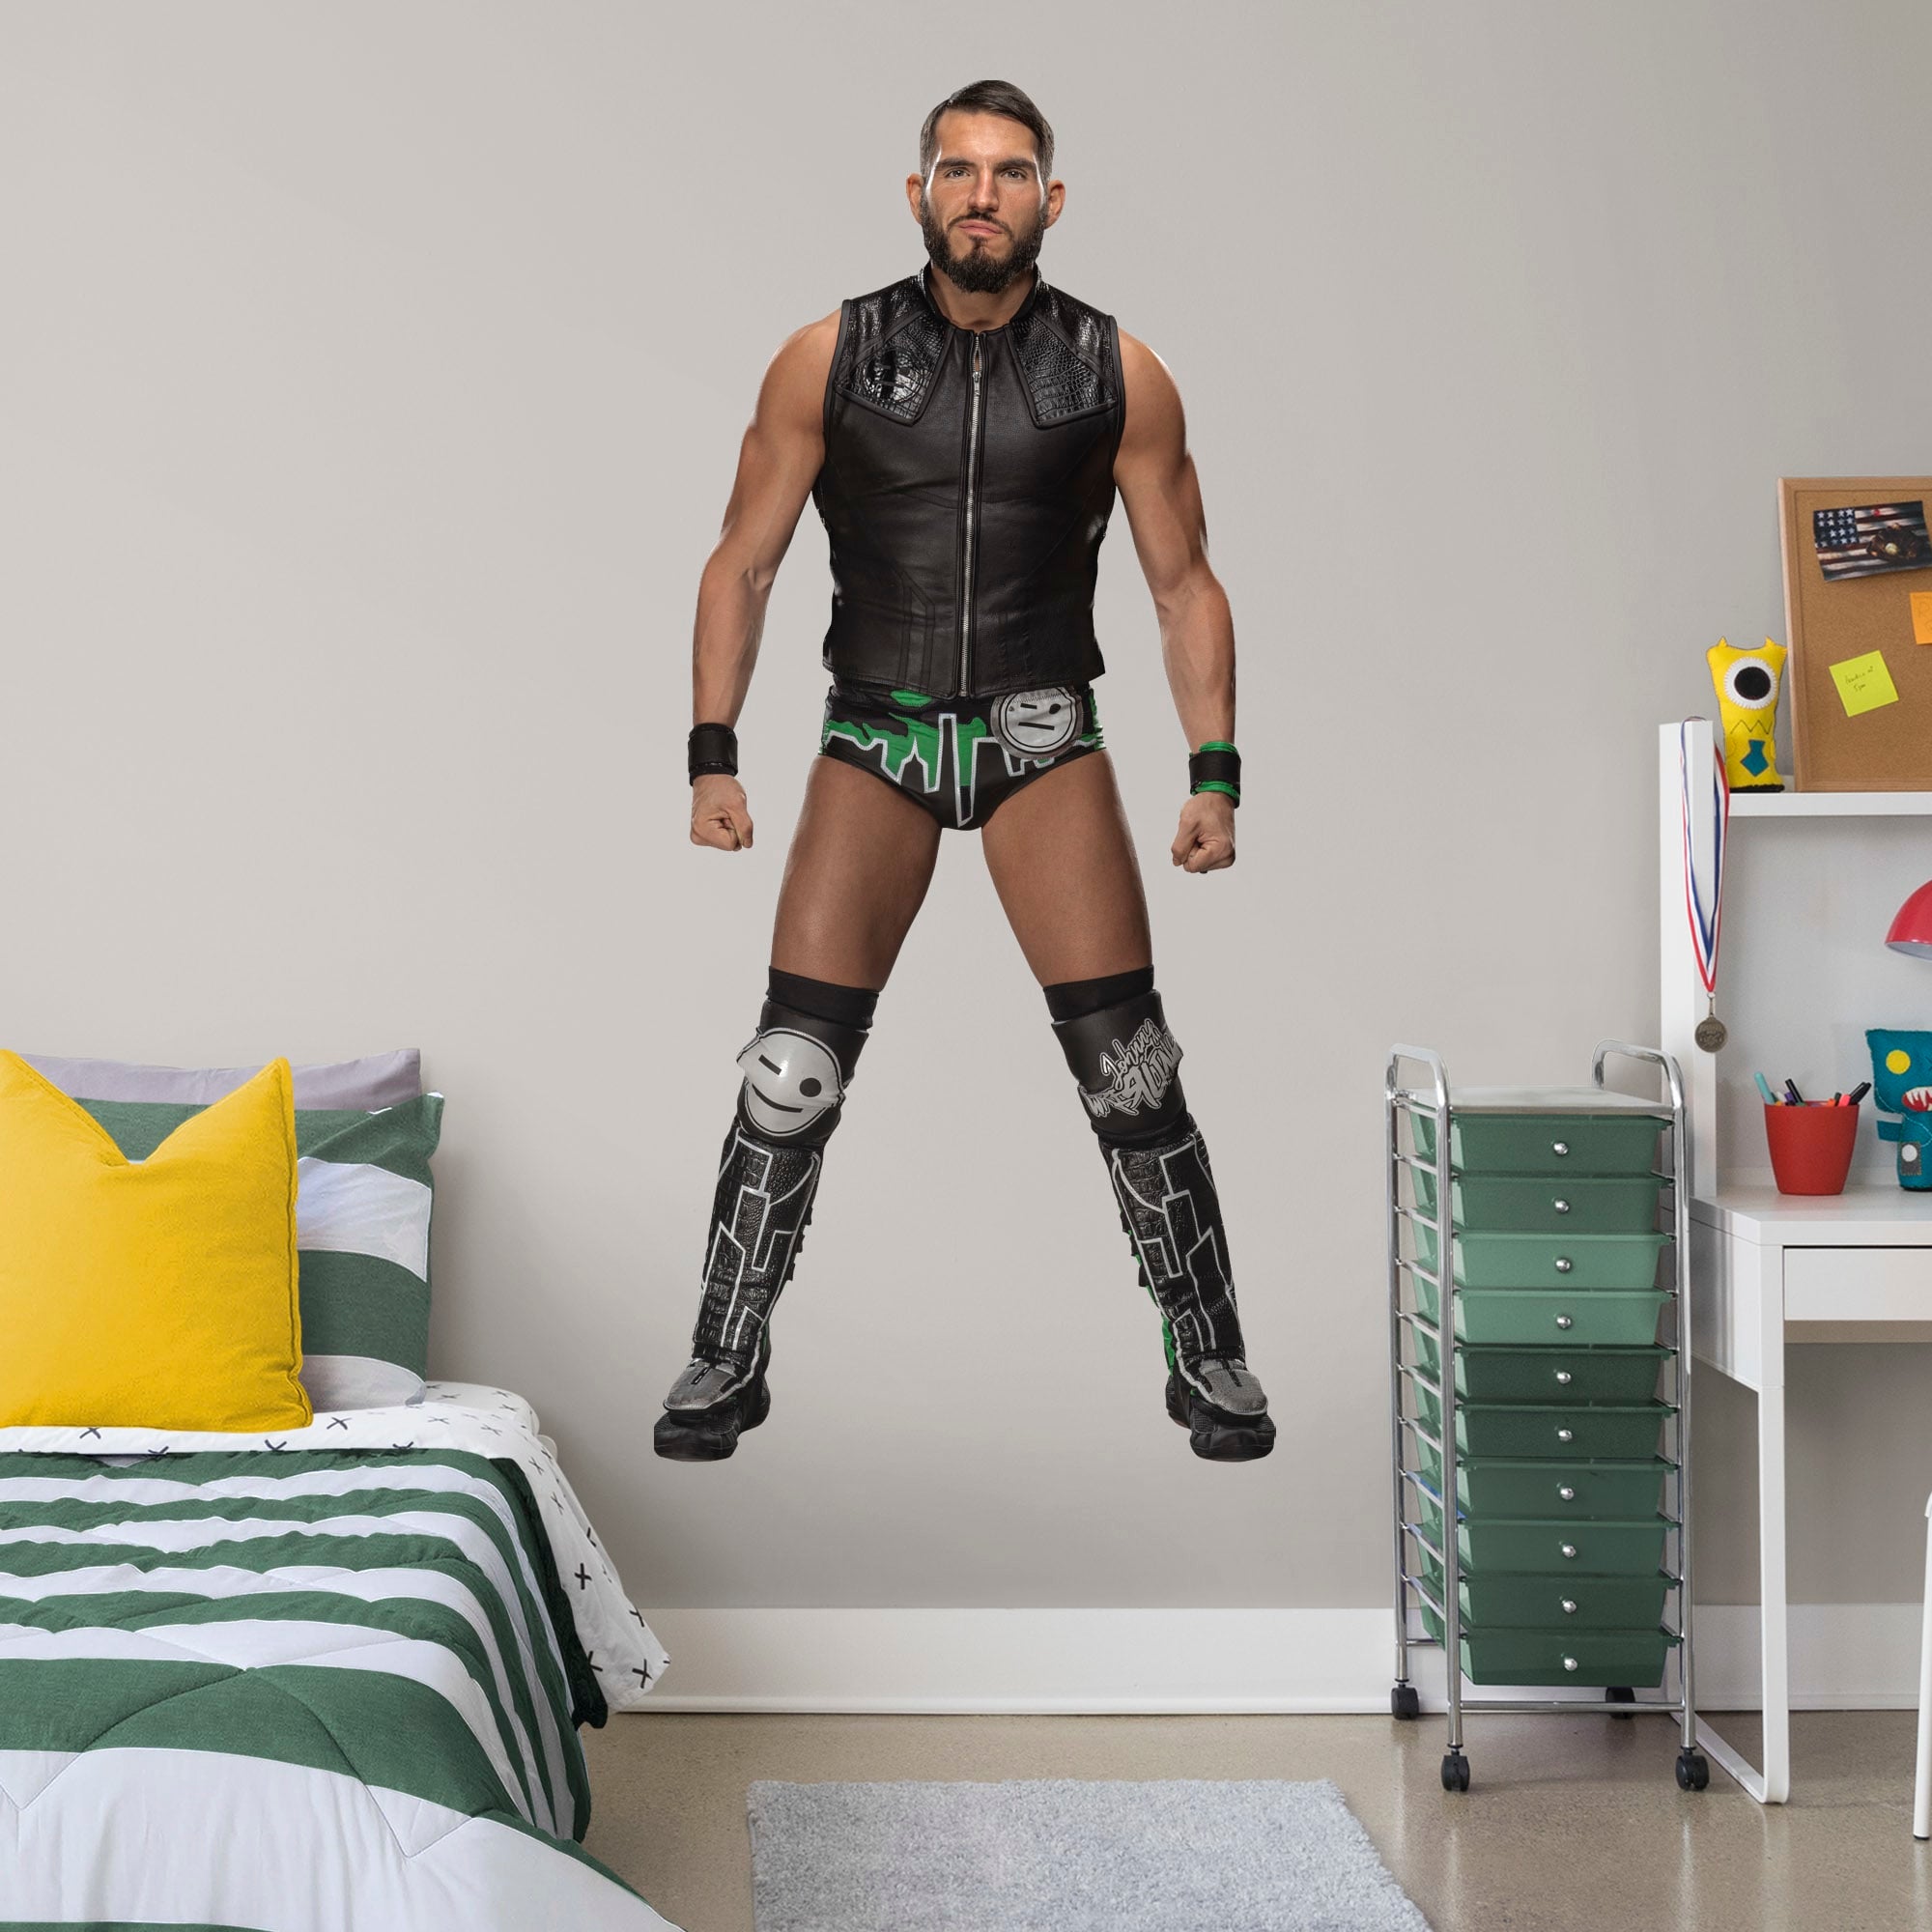 Johnny Gargano for WWE - Officially Licensed Removable Wall Decal Life-Size Superstar + 2 Decals (35"W x 76"H) by Fathead | Viny